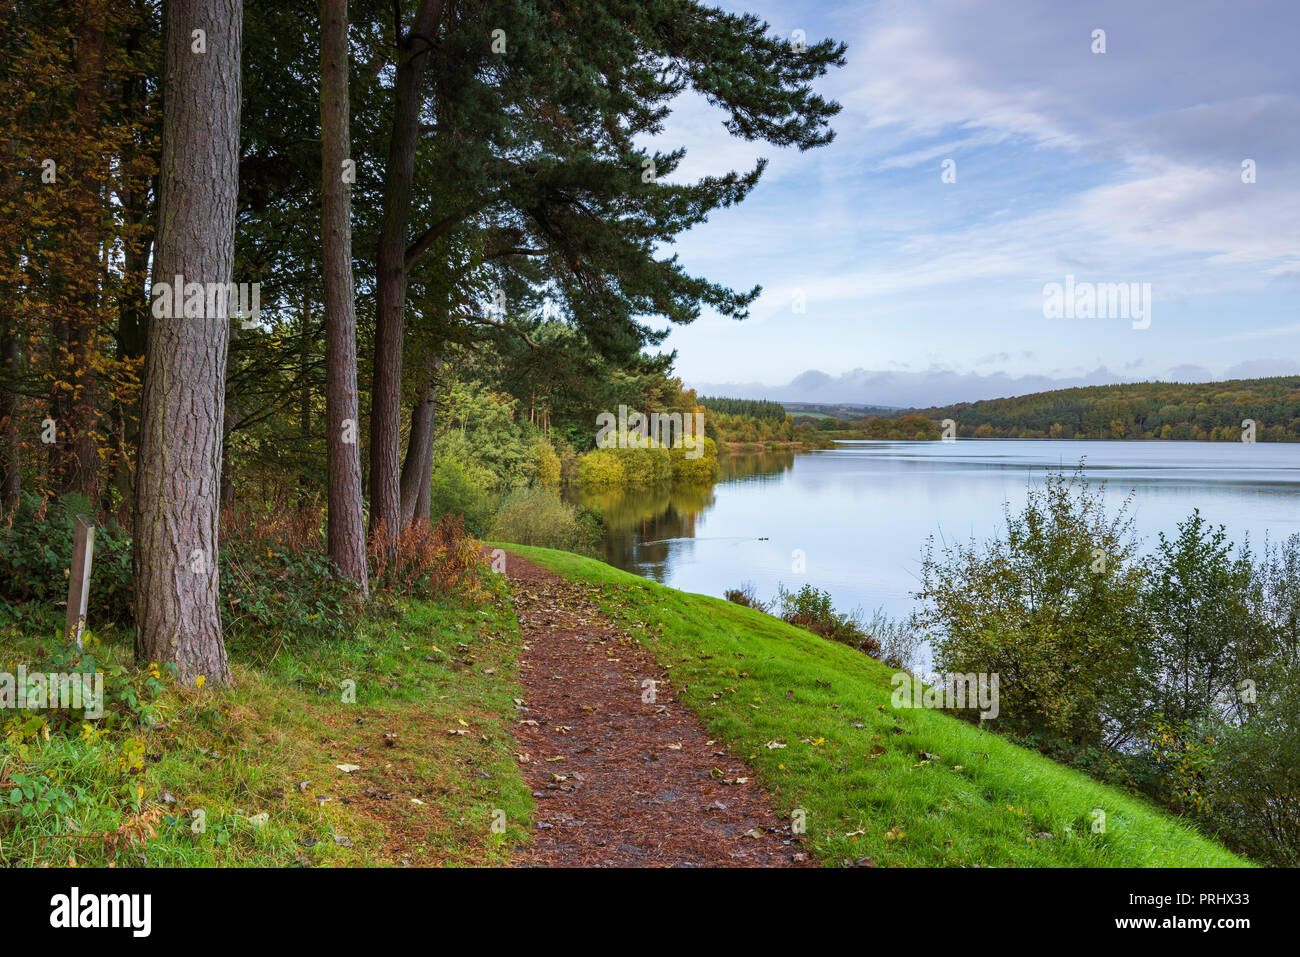 Scenic view from path, of beautiful quiet calm tree-lined lake under deep blue sky - Fewston Reservoir, Washburn Valley, North Yorkshire, England, UK. Stock Photo